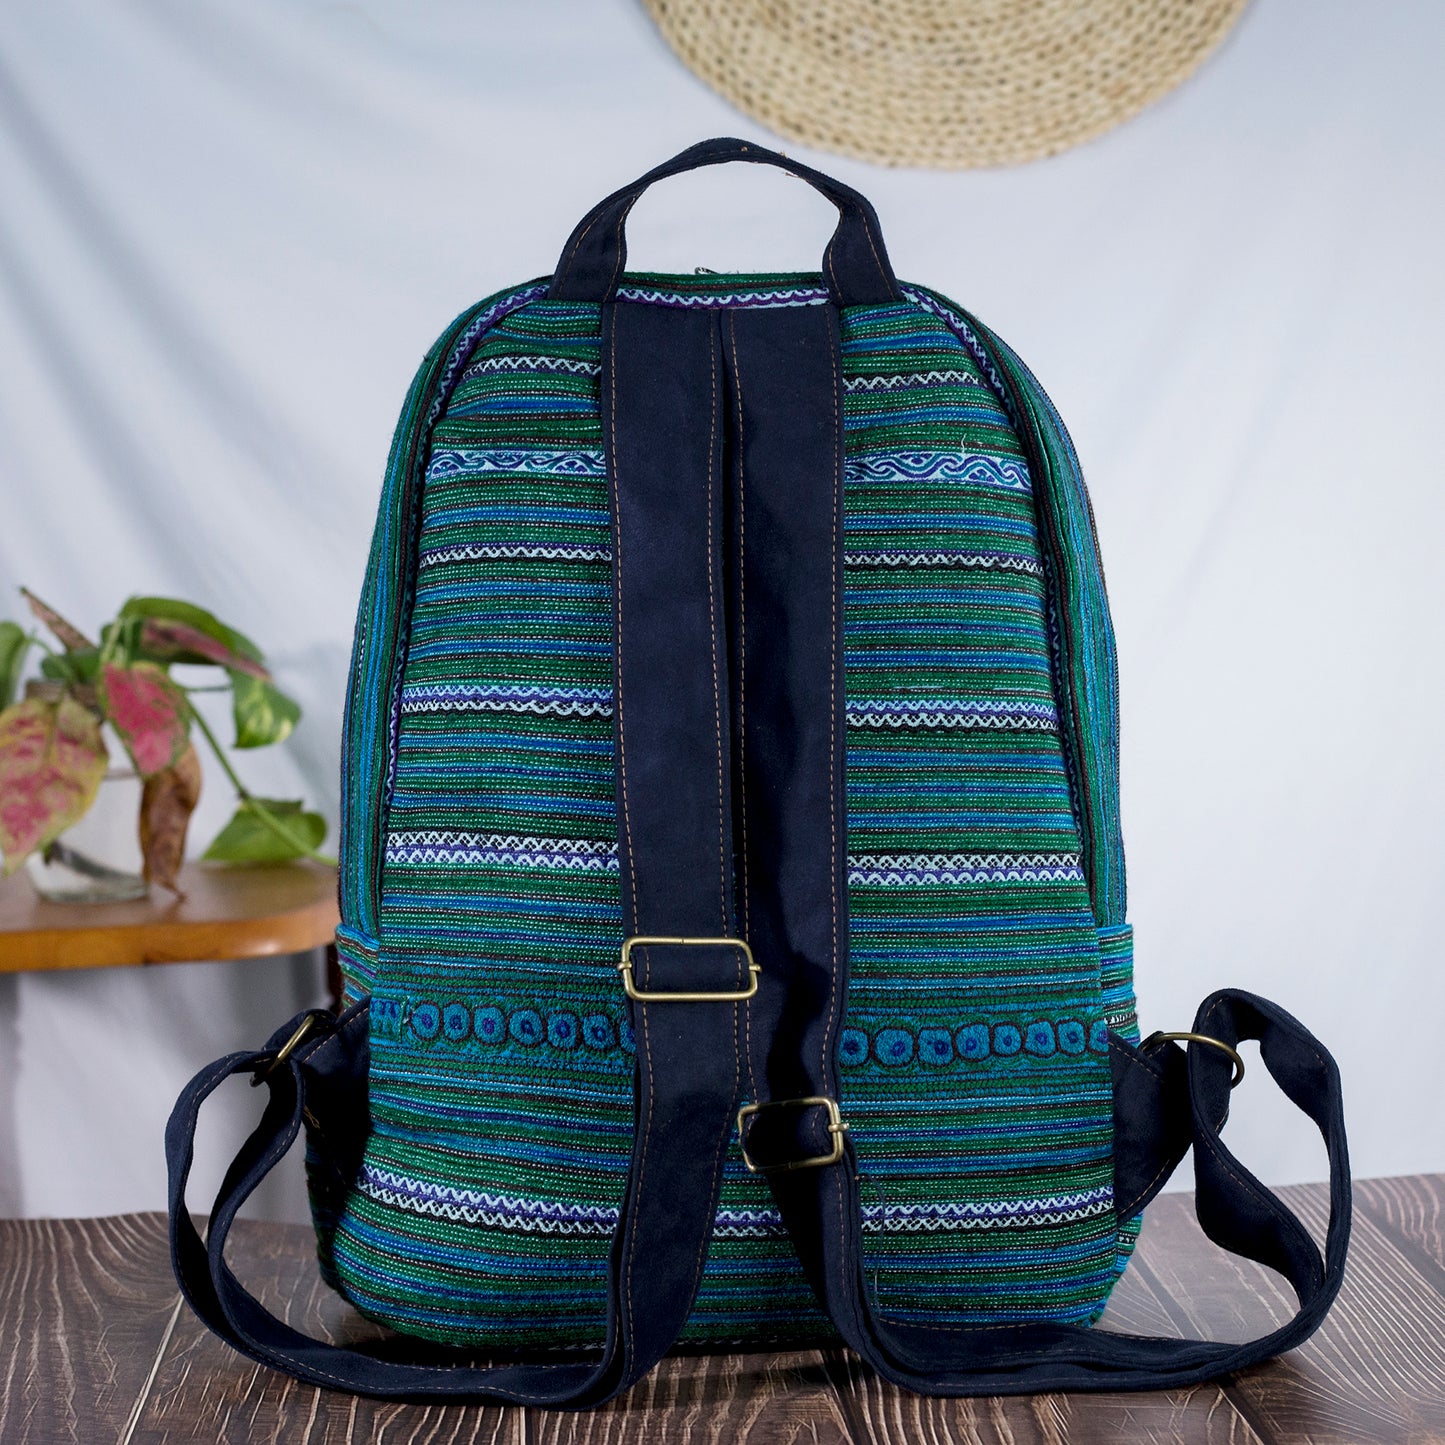 Big-sized backpack, round pocket in front, blue hand-embroidery fabric, black faux leather trim